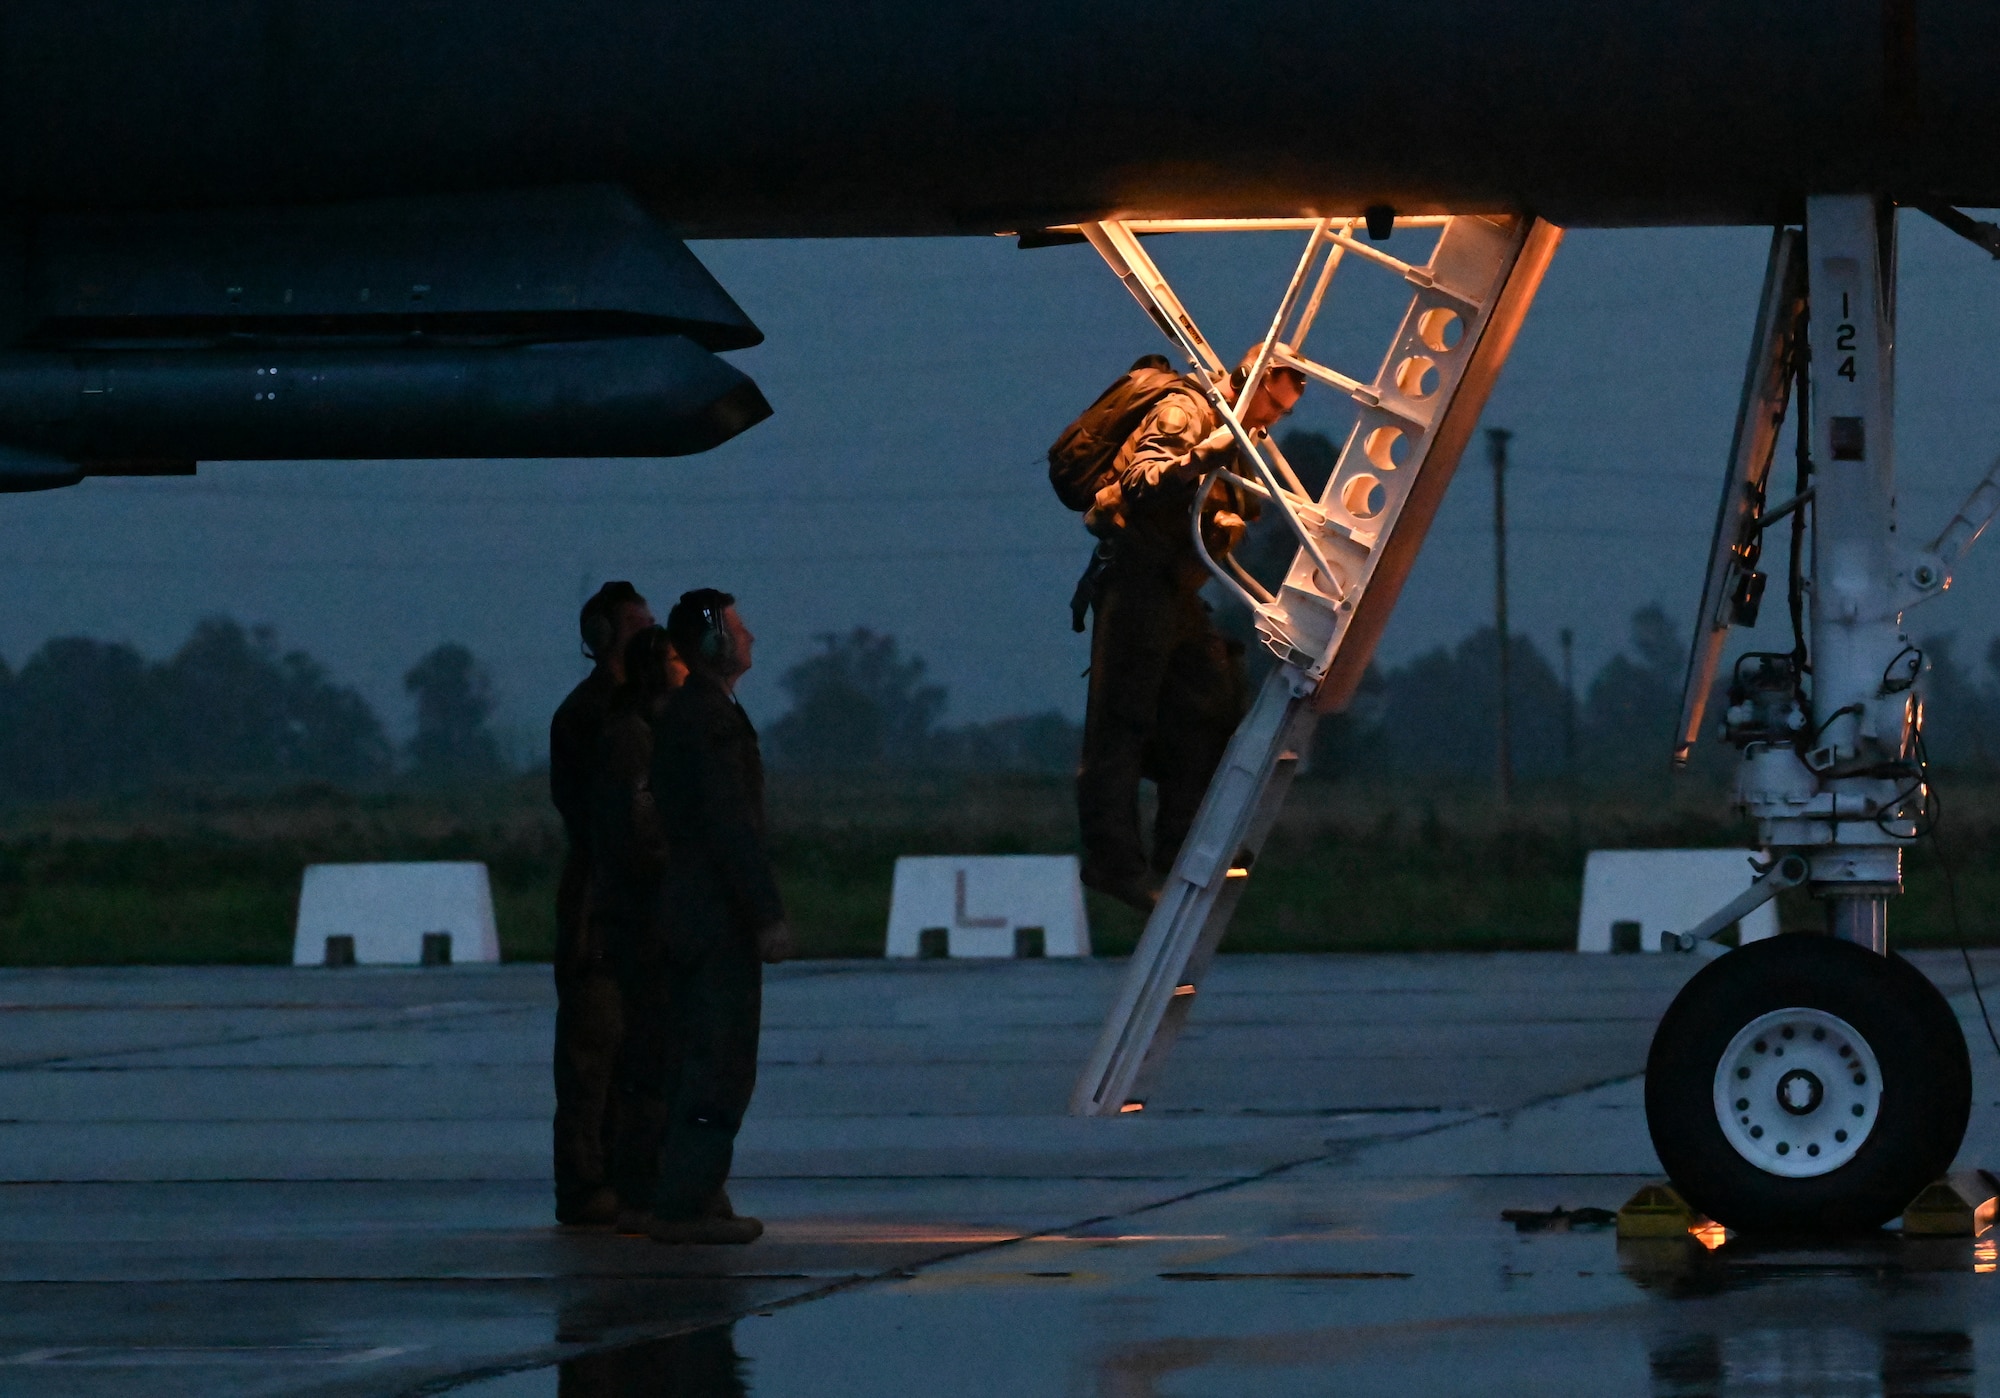 Members of the 9th Expeditionary Bomb Squadron help crew members exit a B-1B Lancer assigned to Dyess Air Force Base, Texas, during Bomber Task Force 24-2 at Morón Air Base, Spain, March 24, 2024. BTF 24-2 is a part of LSGE 24, an umbrella term that incorporates dozens of separate exercises and military activities, under multiple combatant commands, that enable the U.S. Joint Force to train with Allies and partners and improve shared understanding, trust and interoperability on security challenges across the globe. (U.S. Air Force photo by Staff Sgt. Holly Cook)